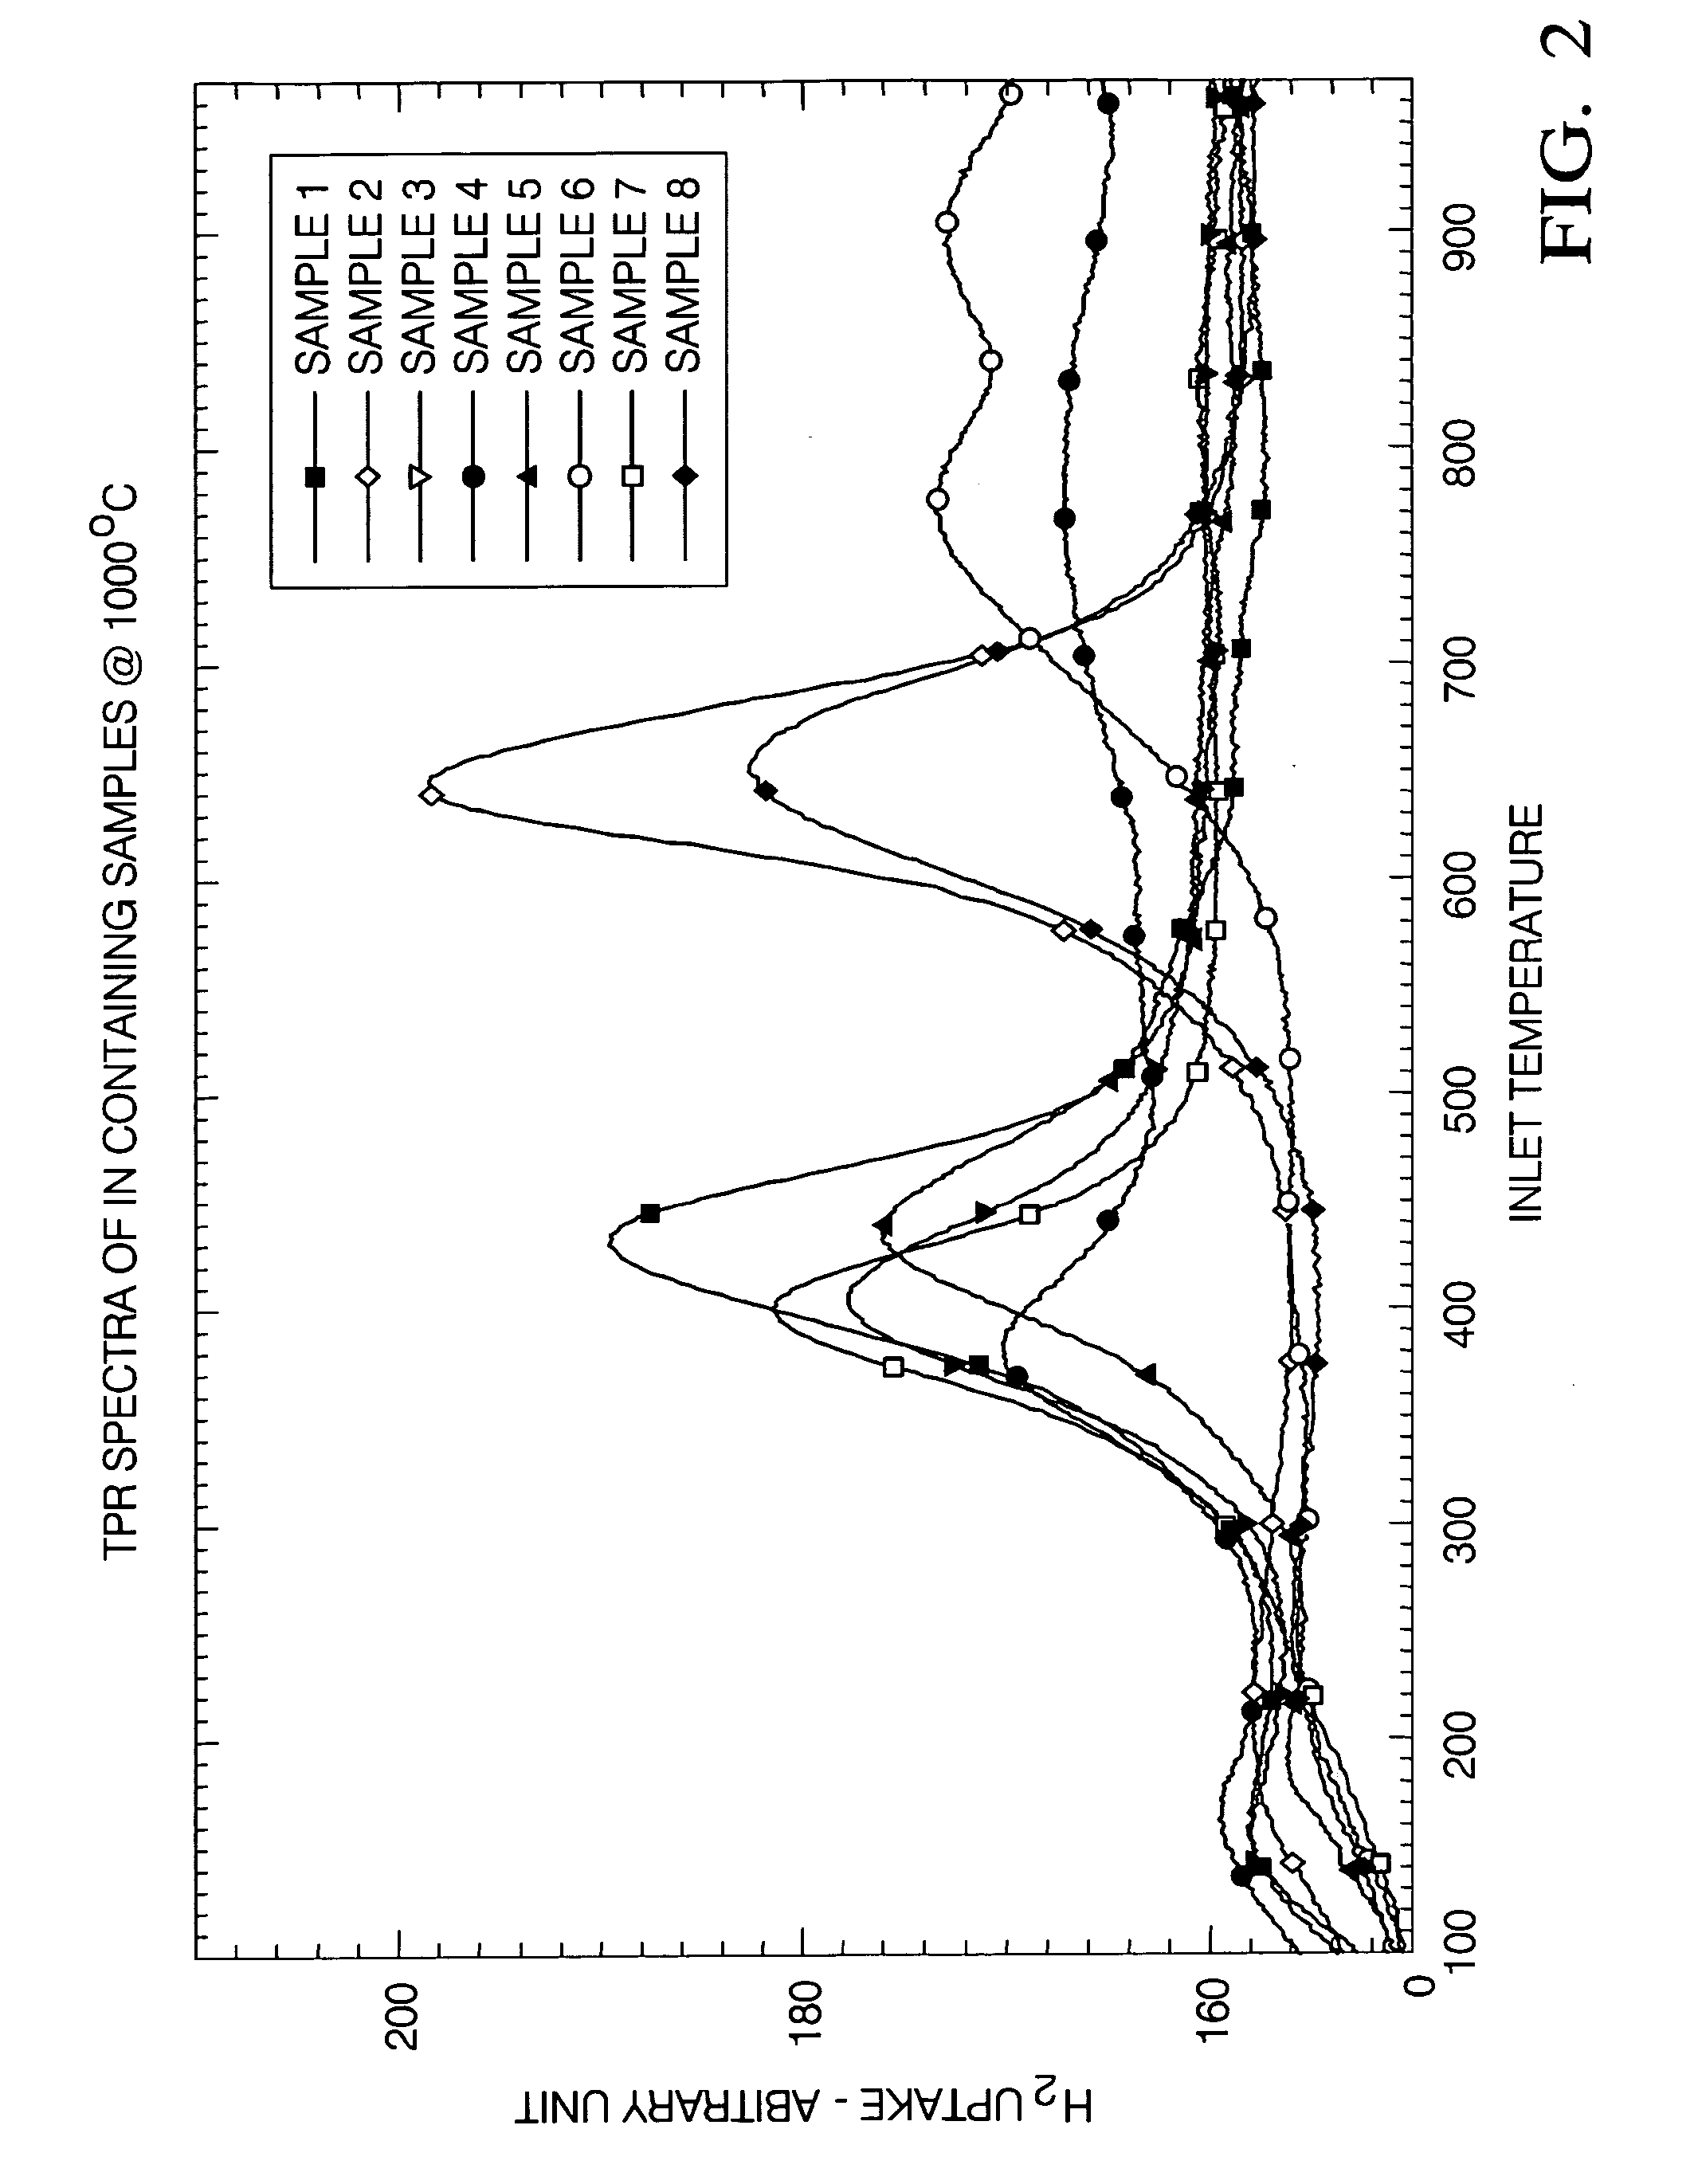 Ce-Zr based solid solutions and methods for making and using the same